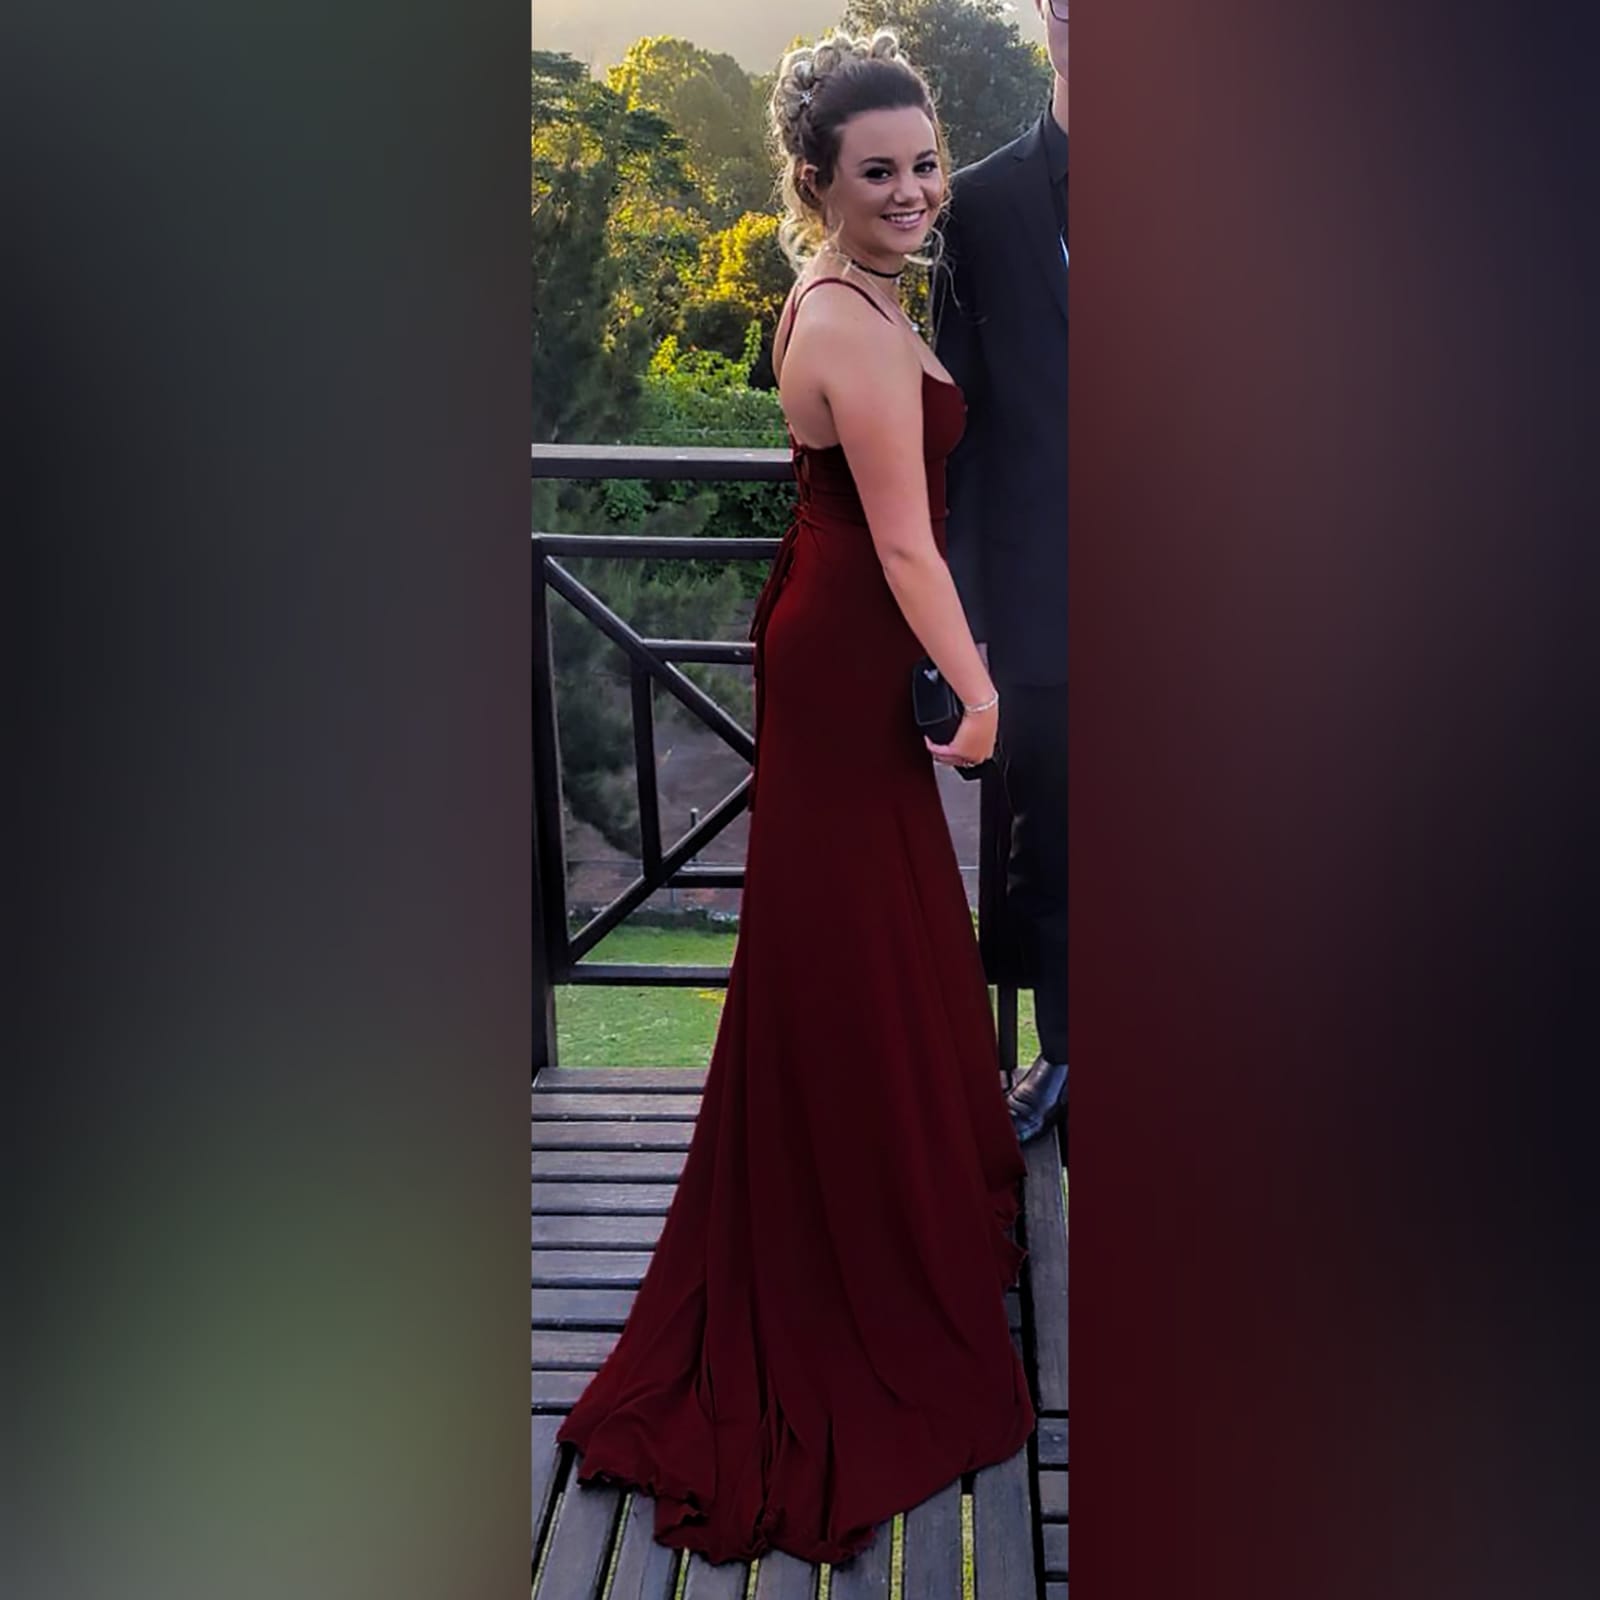 Maroon lace-up back long simple prom dress 2 maroon lace-up back long simple prom dress with thin shoulder straps, high slit and a small train. Lace-up back to adjust the fit.